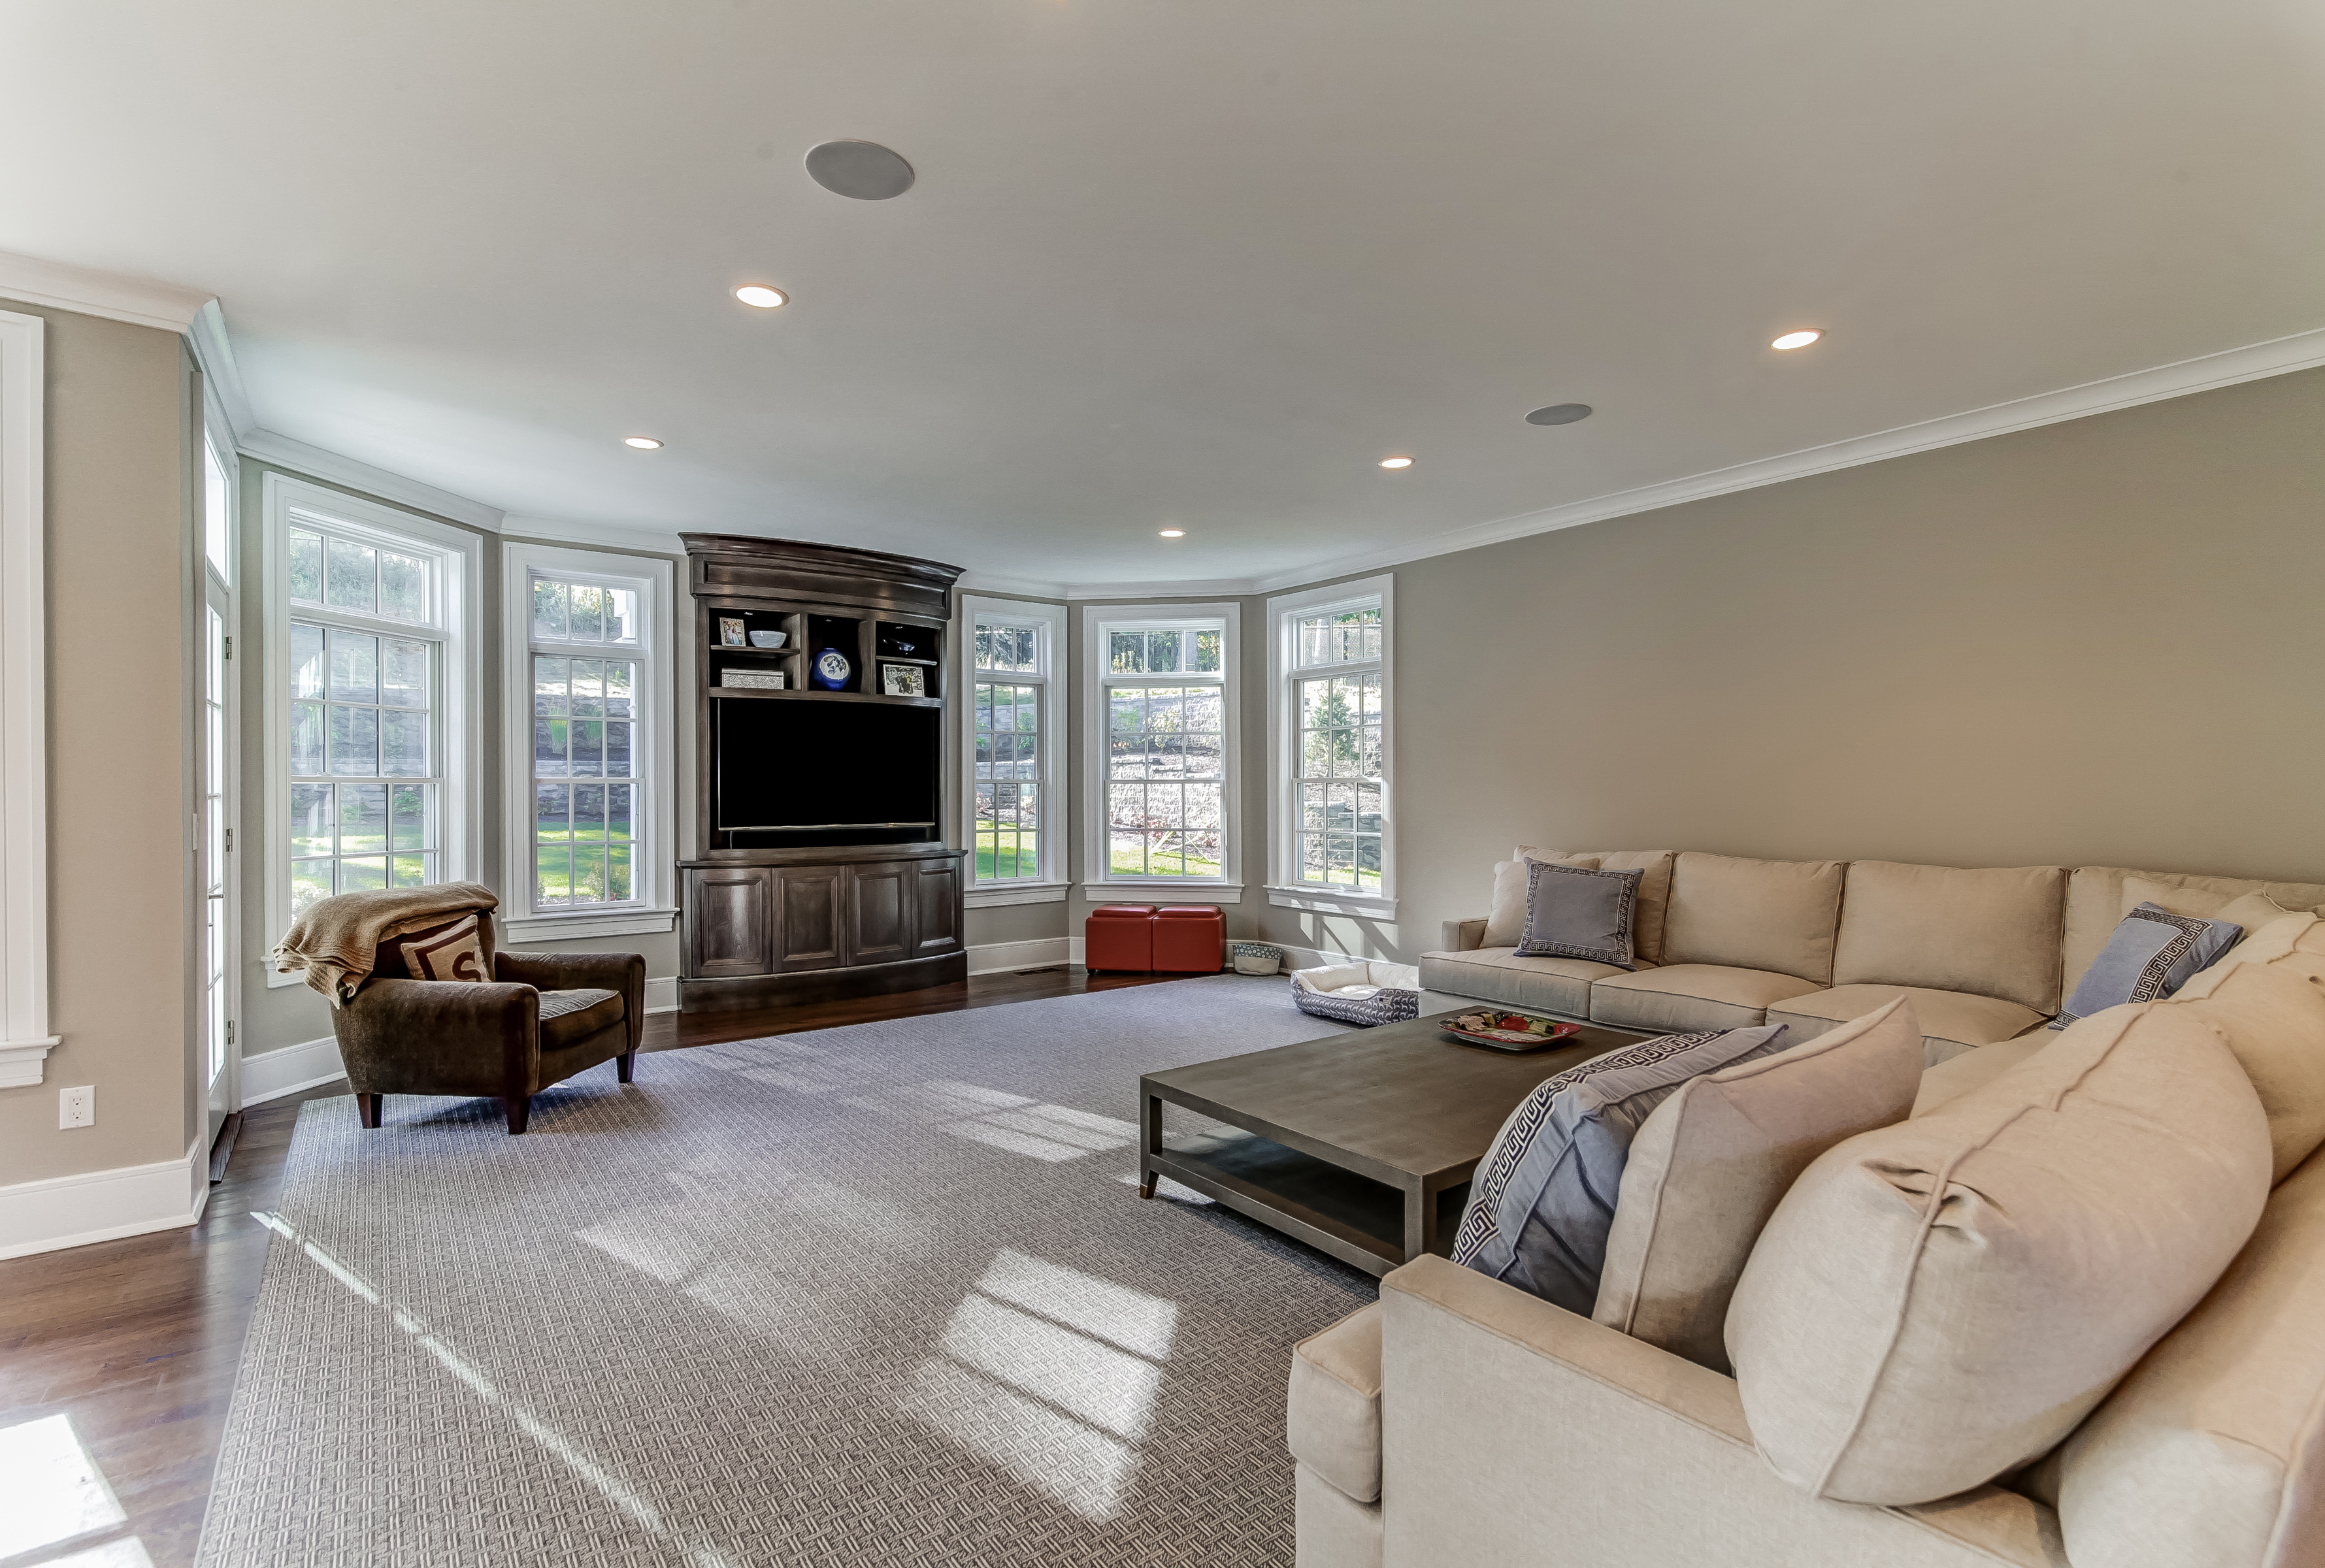 6 – Family Room – 20 Troy Drive, Example of Most Recent Project from Builder